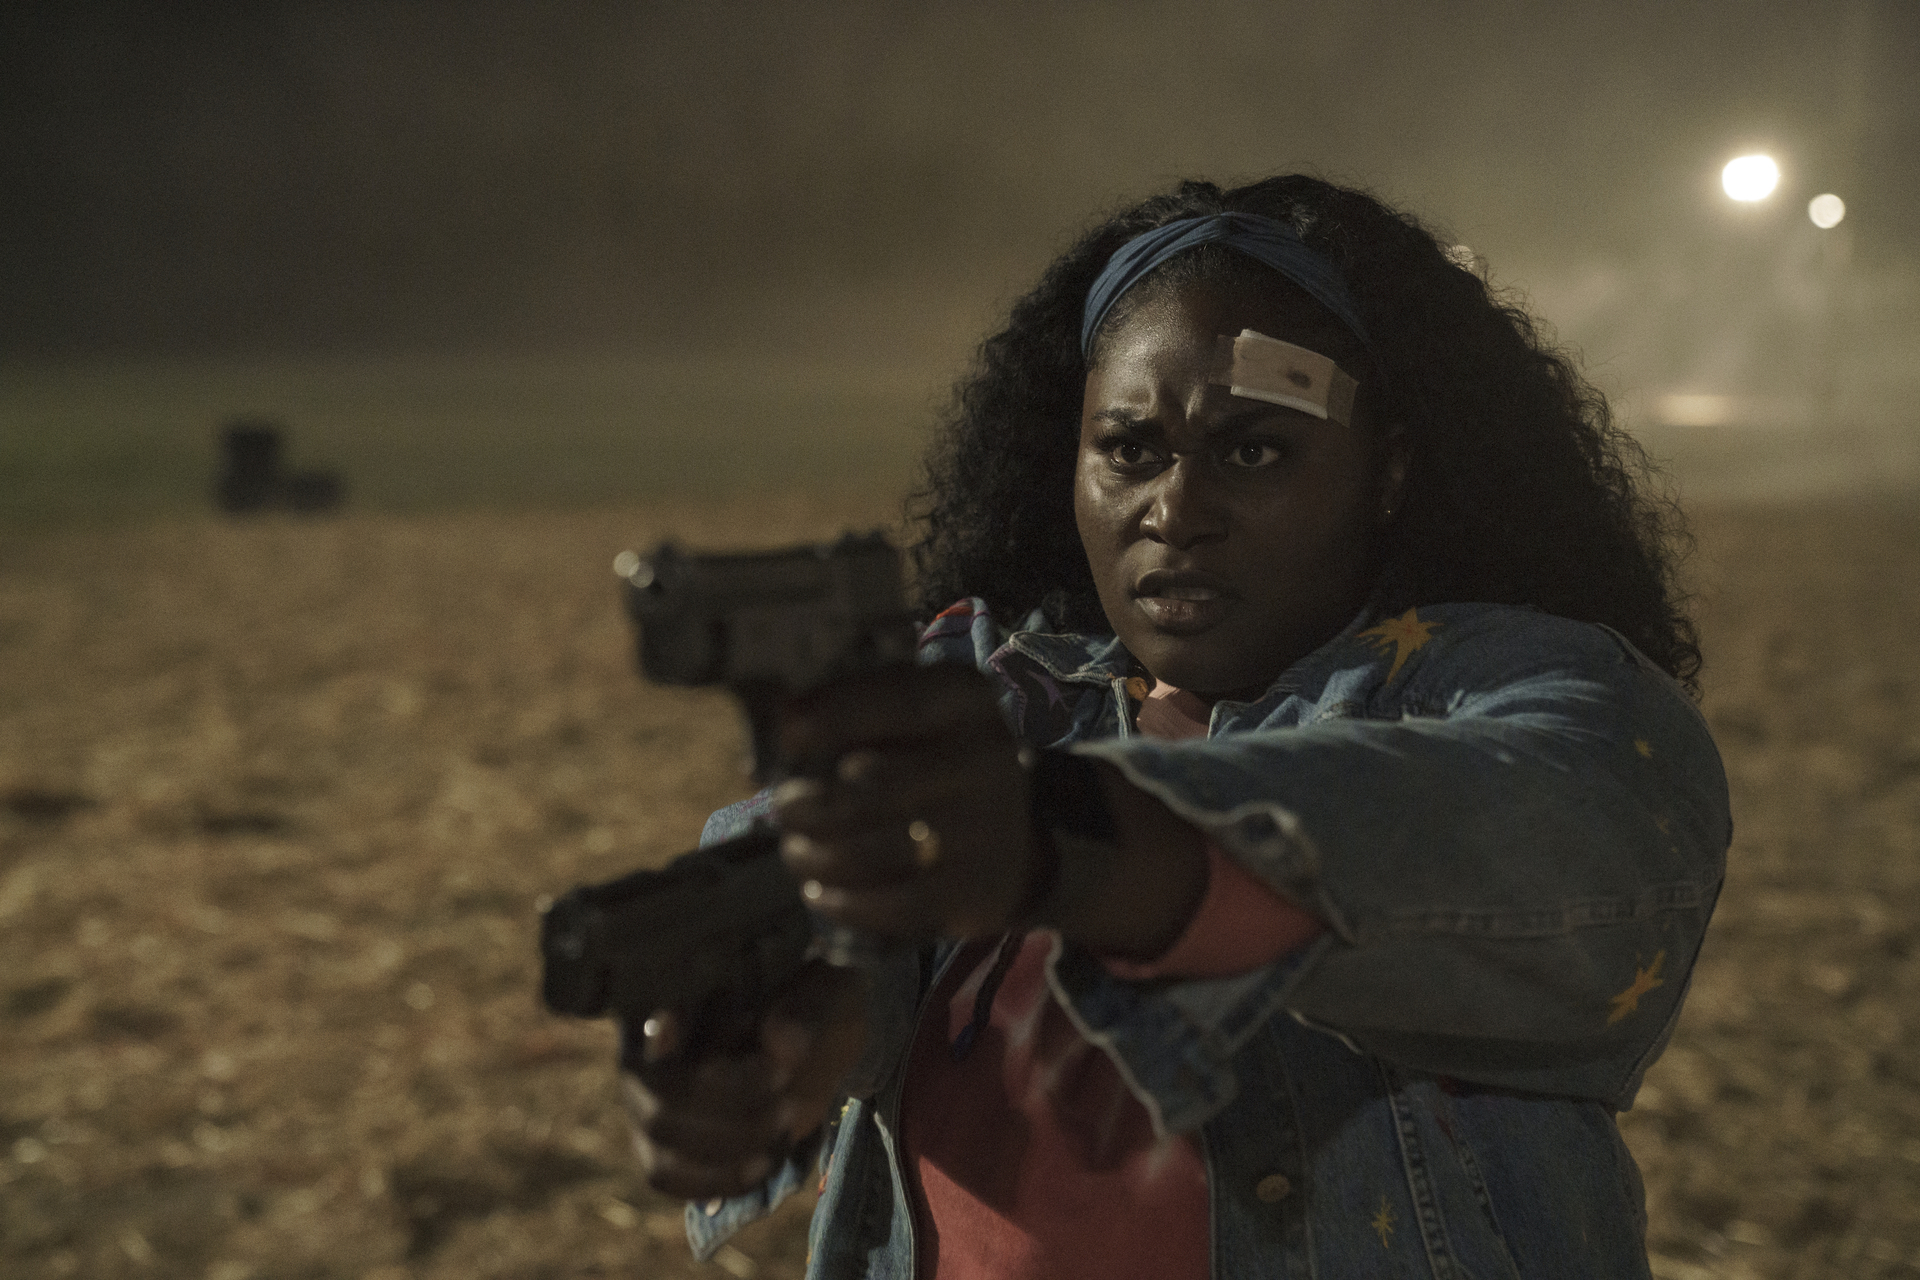 Danielle Brooks as Leota Adebayo in DC's 'Peacemaker' Episode 8. Her head has a bandage on it and she's holding a gun.